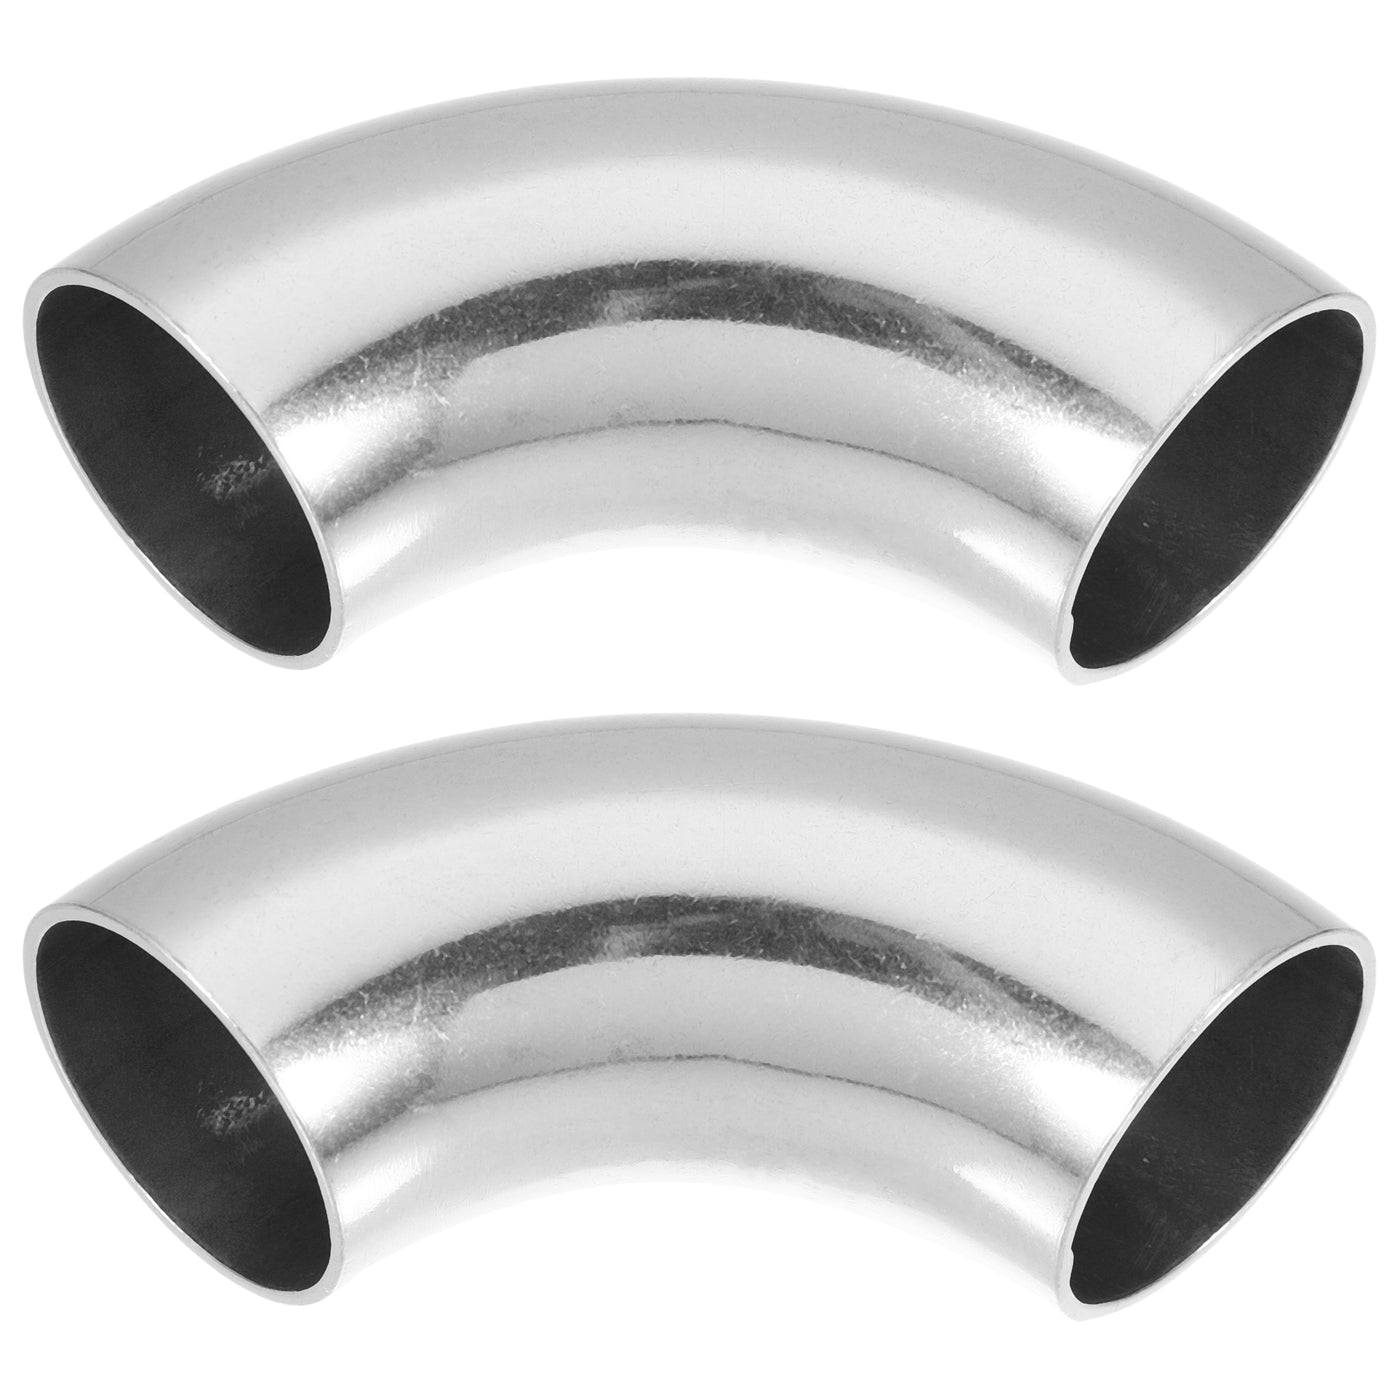 uxcell Uxcell 2pcs 90 Degree SS304 Stainless Steel Bend Tube Exhaust Elbow Pipe for Car Modified Exhaust System 3.94" Arc Length Piping Silver Tone